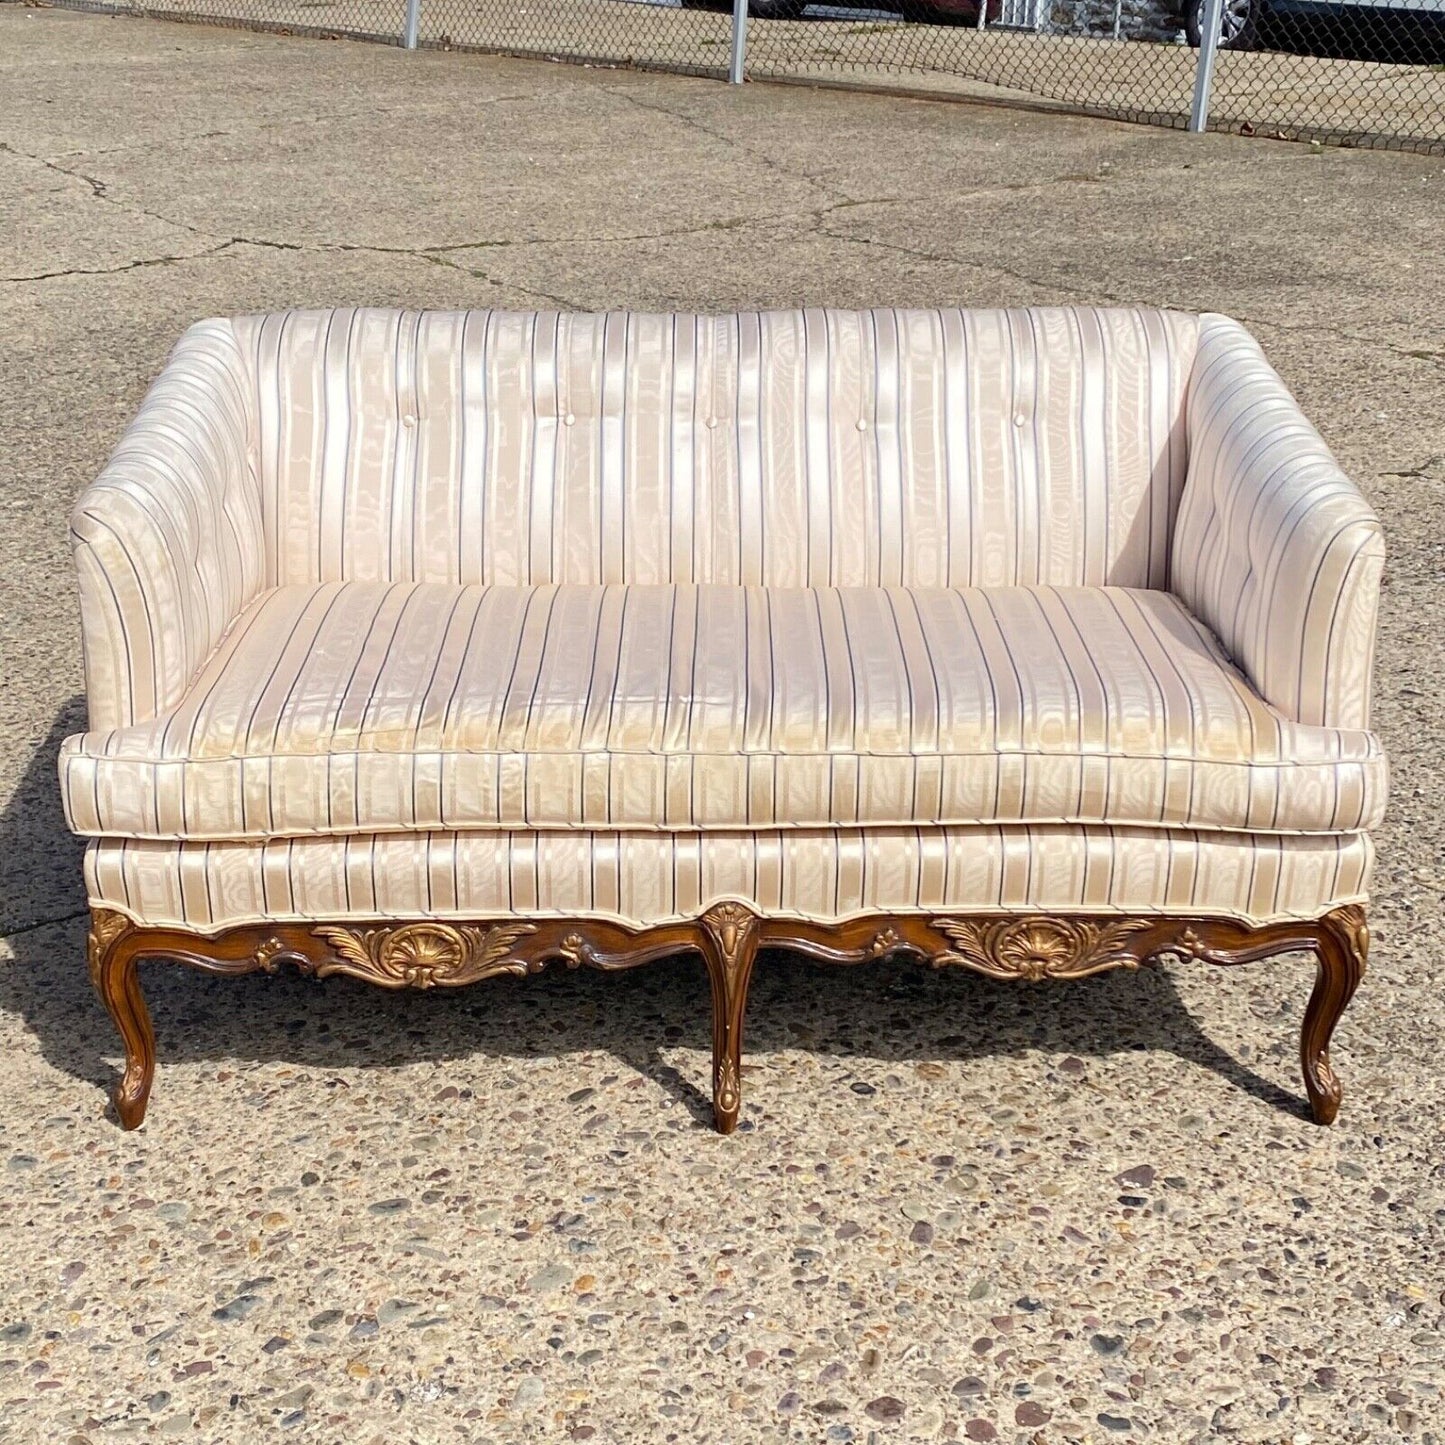 French Louis XV Provincial Style Upholstered Loveseat Sofa Settee - a Pair